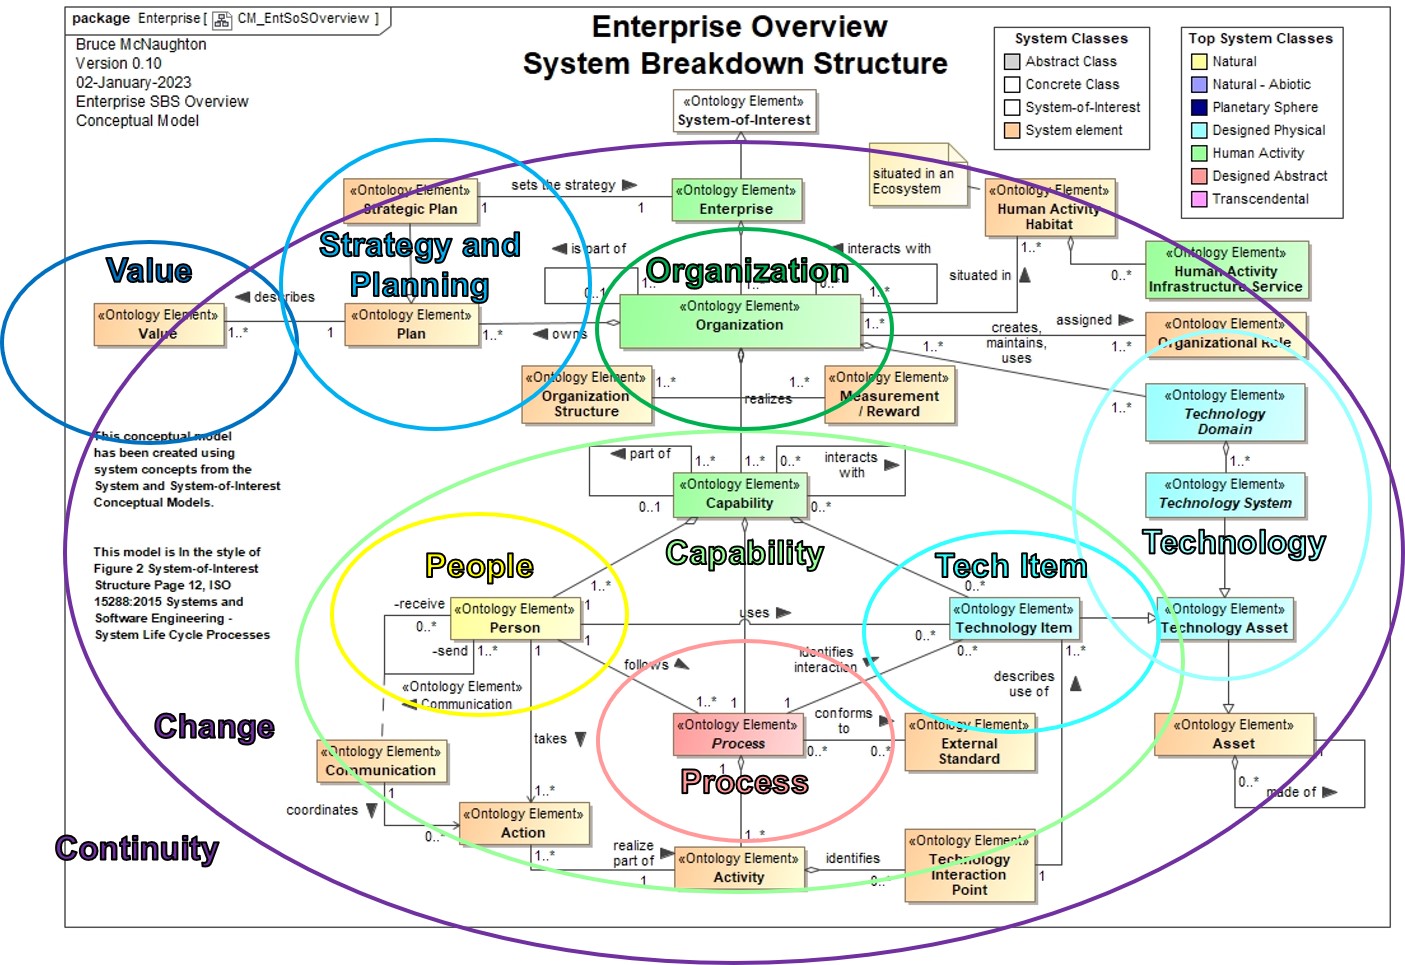 Identification of viewpoints by mapping to the Enterprise (SoS) System Breakdown Structure